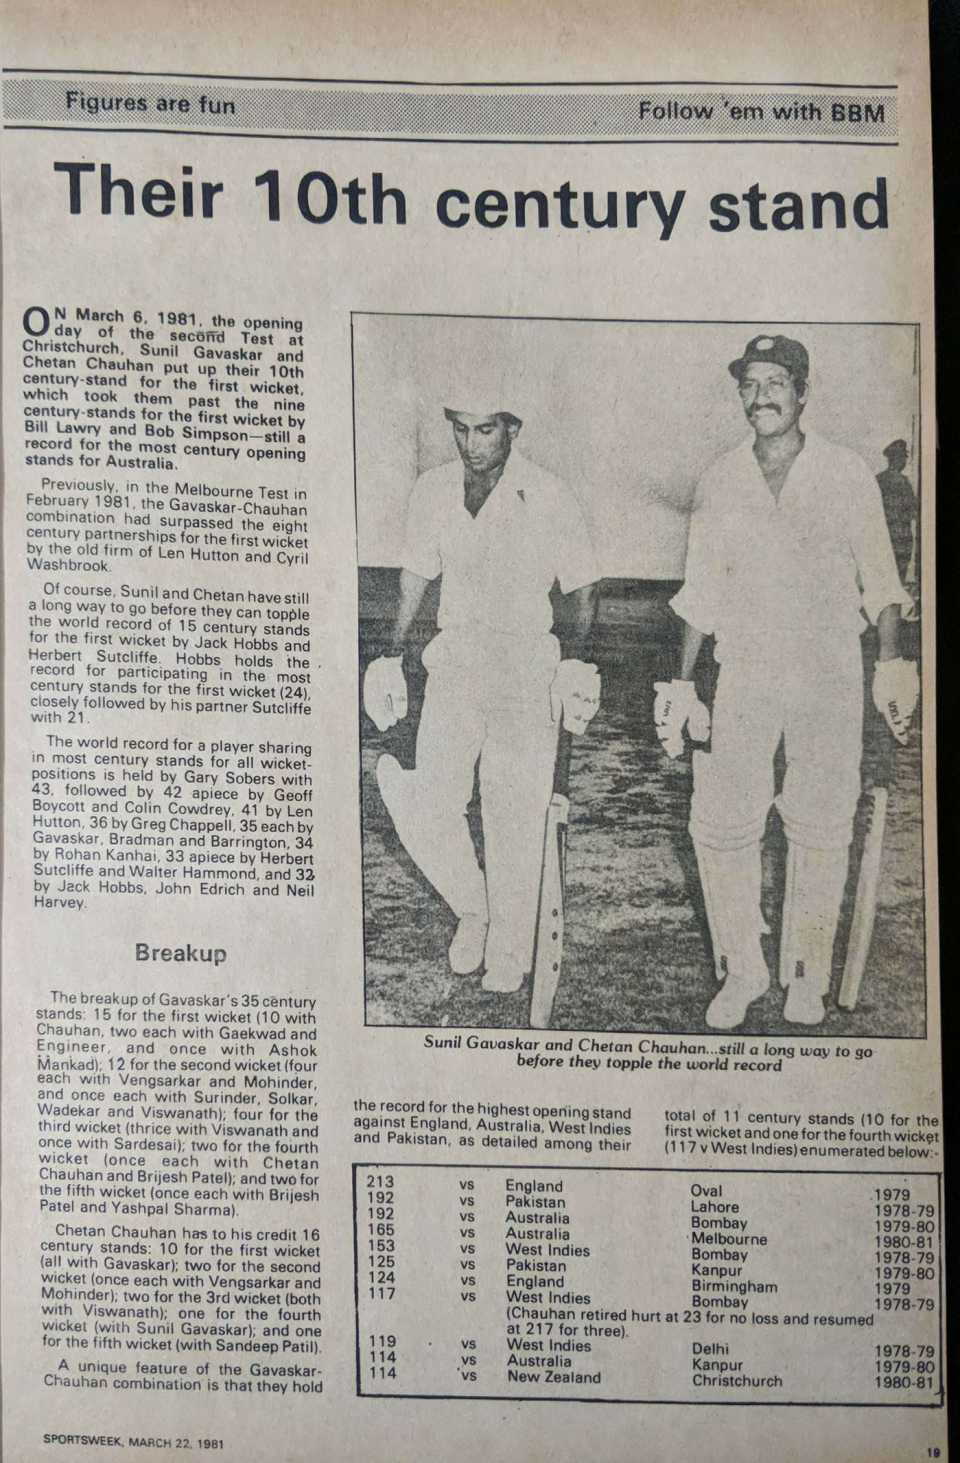 A <i>Sportsweek</i> magazine page featuring the 10th century stand for the first wicket between Sunil Gavaskar and Chetan Chauhan, achieved against New Zealand in Christchurch during the 1980-81 series